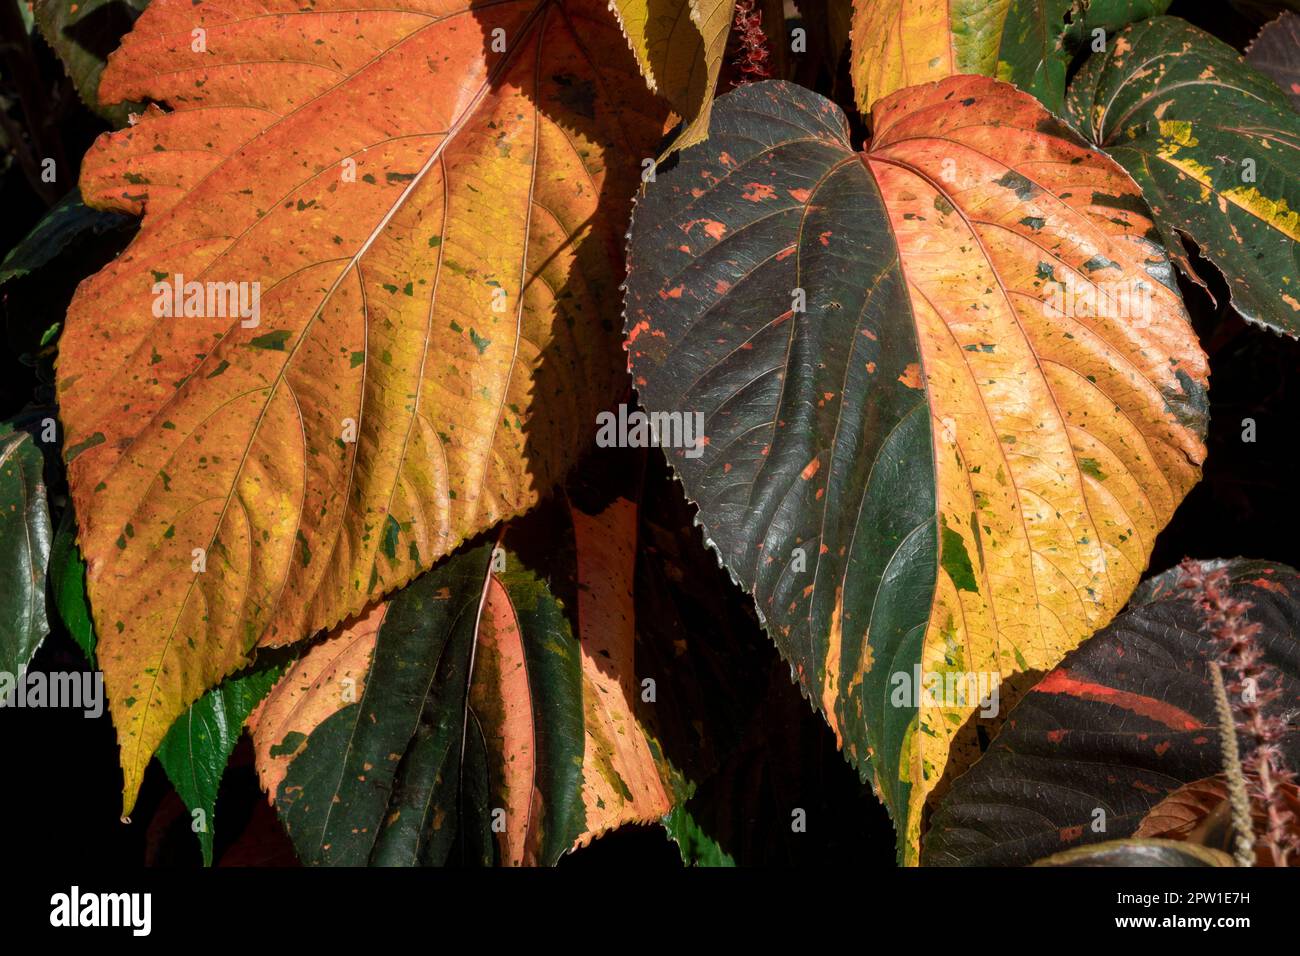 Nature background. Closeup of a plant with multicolored leaves Stock Photo